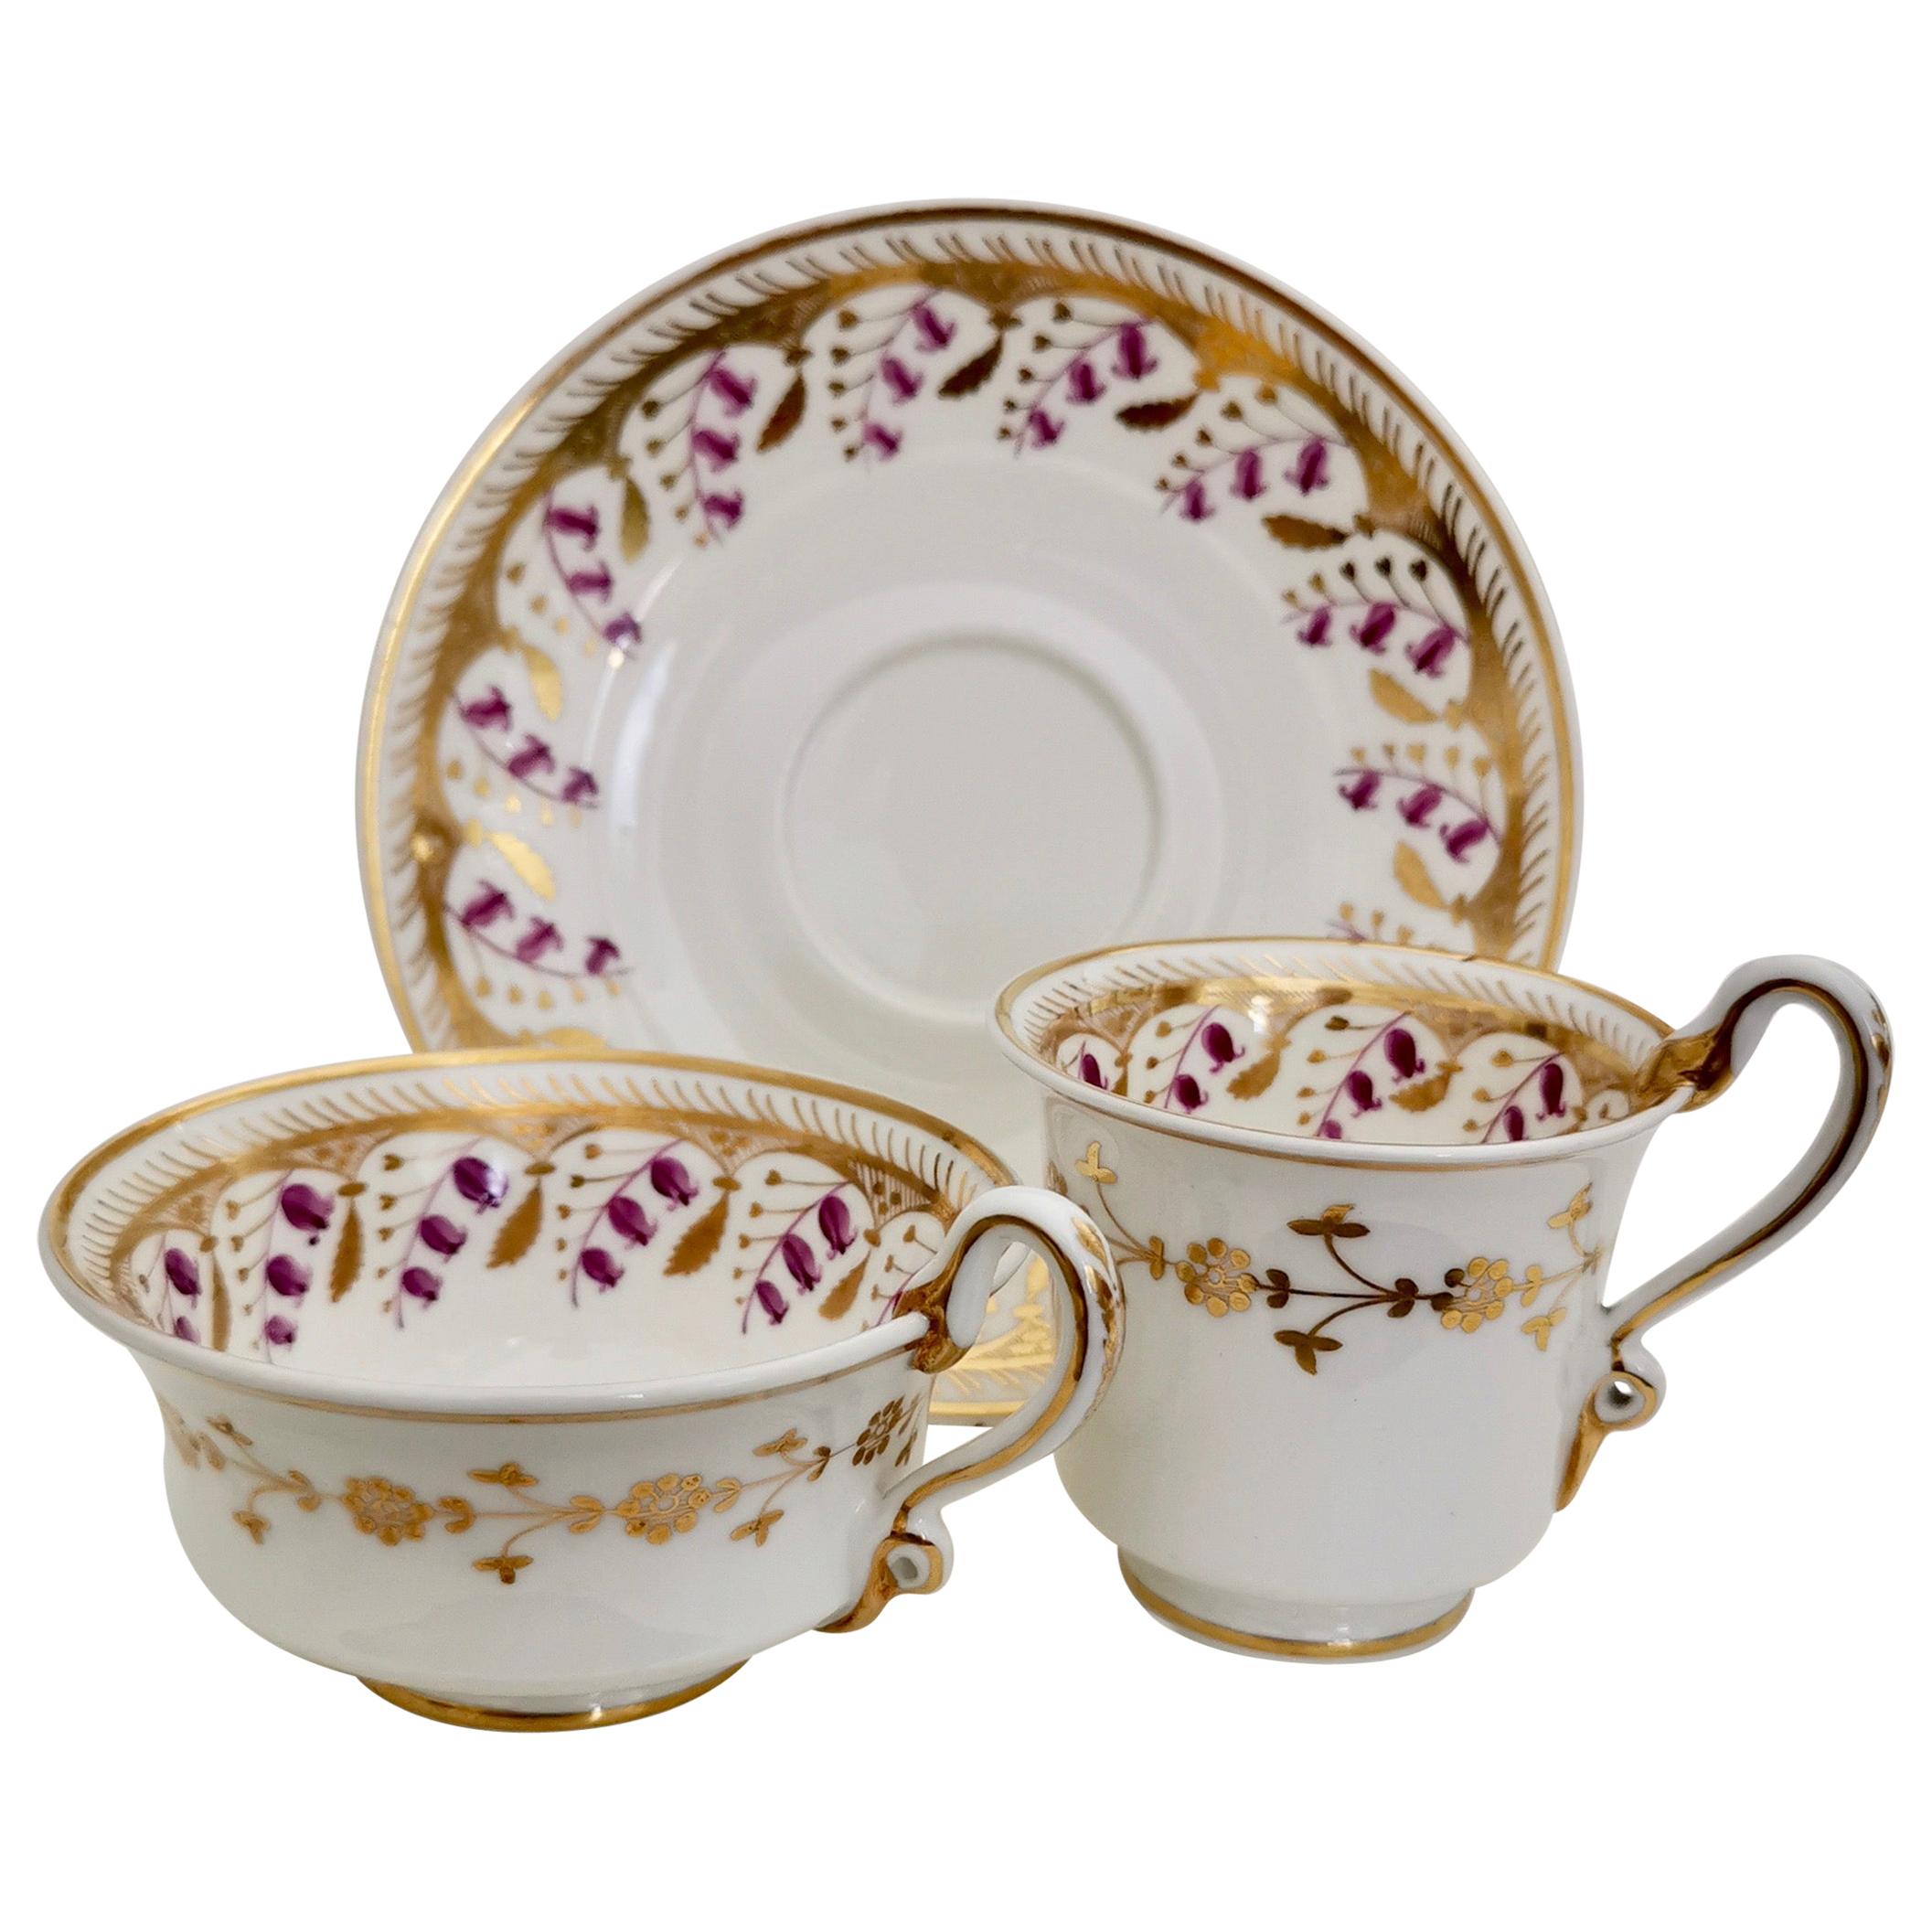 This is a beautiful true trio with serpent handles, made by Spode in about 1826, which was the Regency era. The trio is made in Felspar porcelain and decorated with the harebell pattern no. 3907, which dates to 1826. 

In the late 18th and early